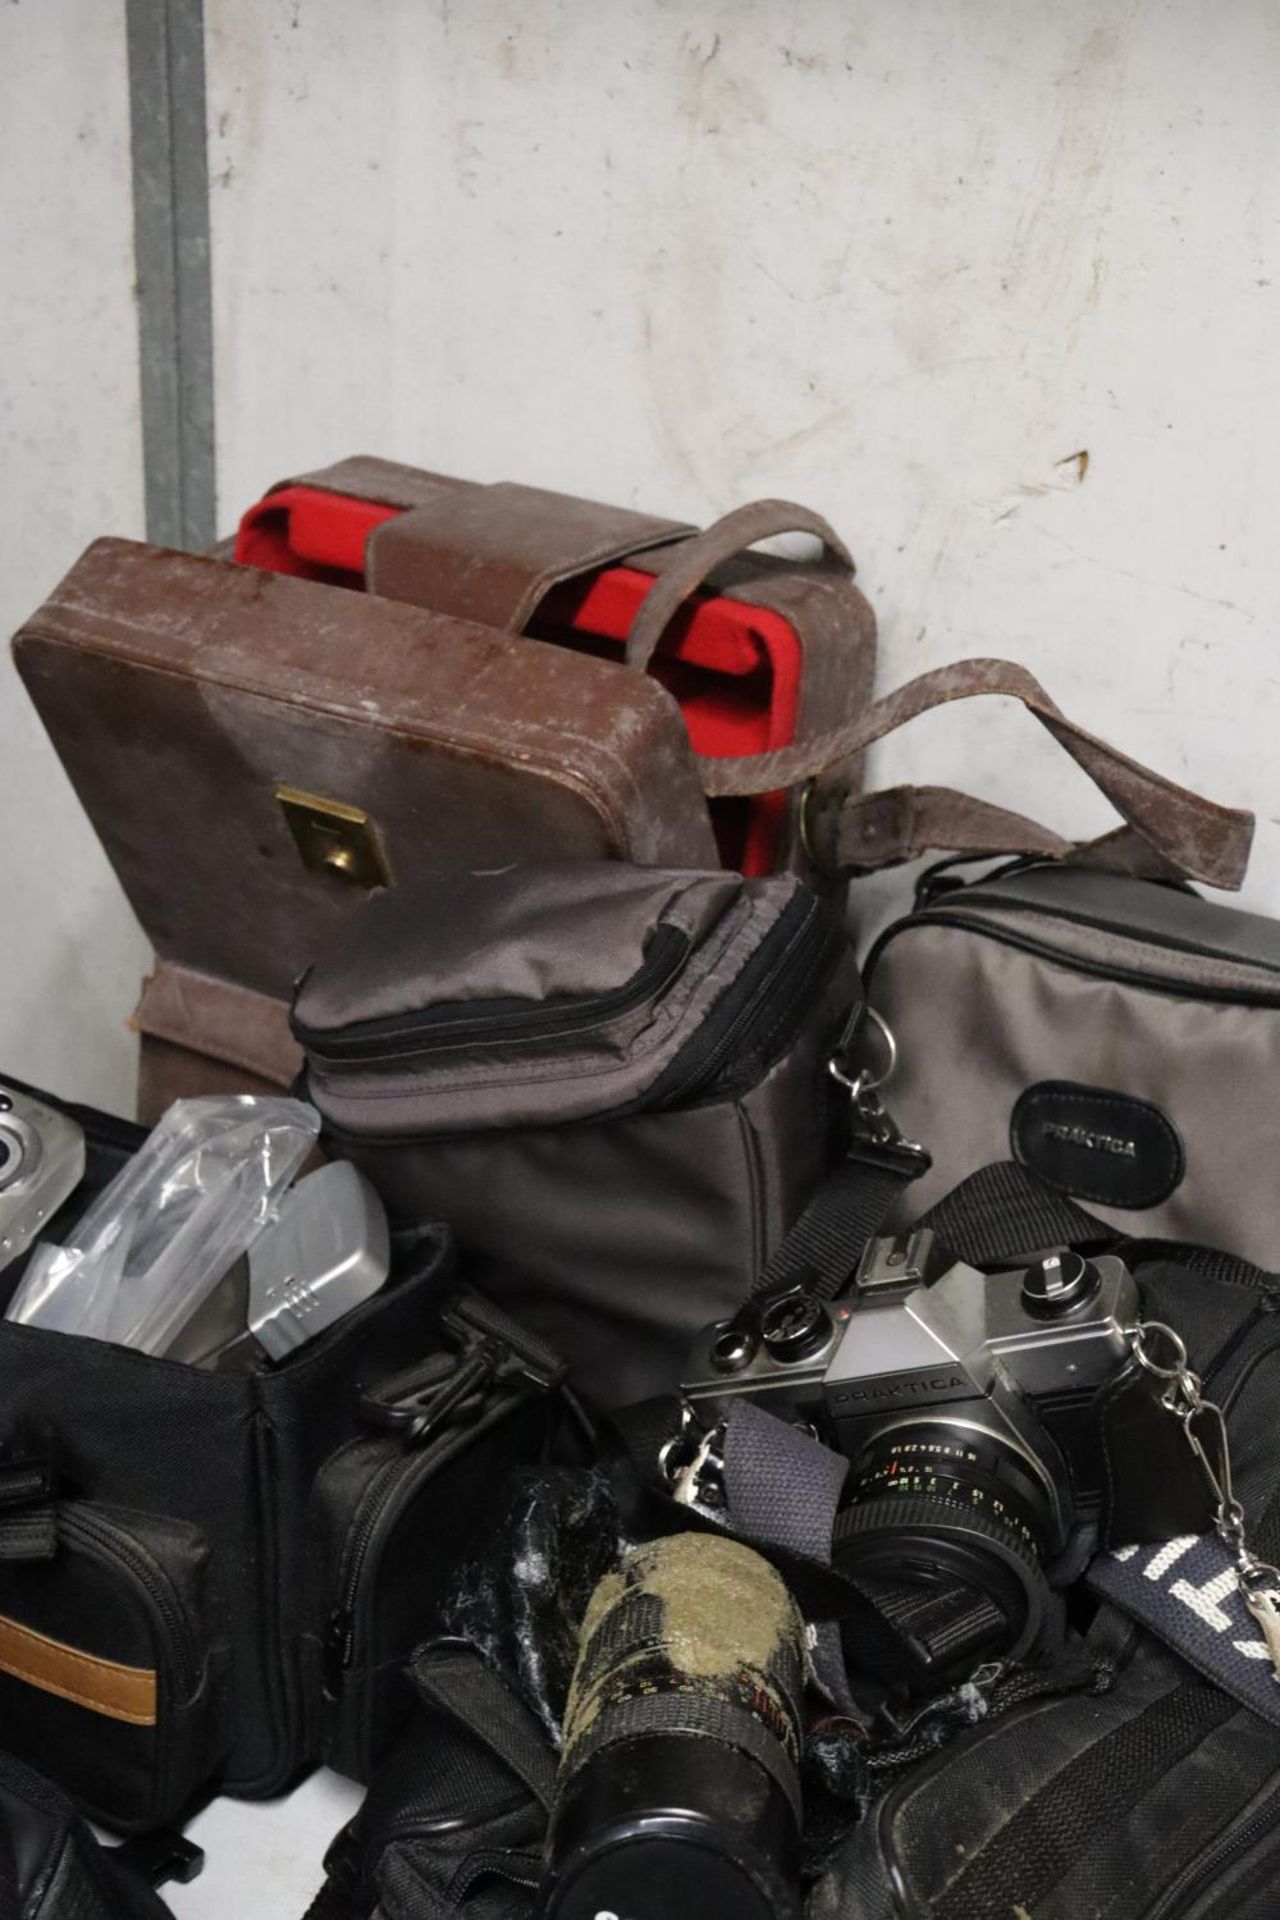 A COLLECTION OF CAMERAS AND ACCESSORIES, TO INCLUDE A KODAK EASYSHARE WITH BAG, CHARGER, ETC, A - Image 6 of 7